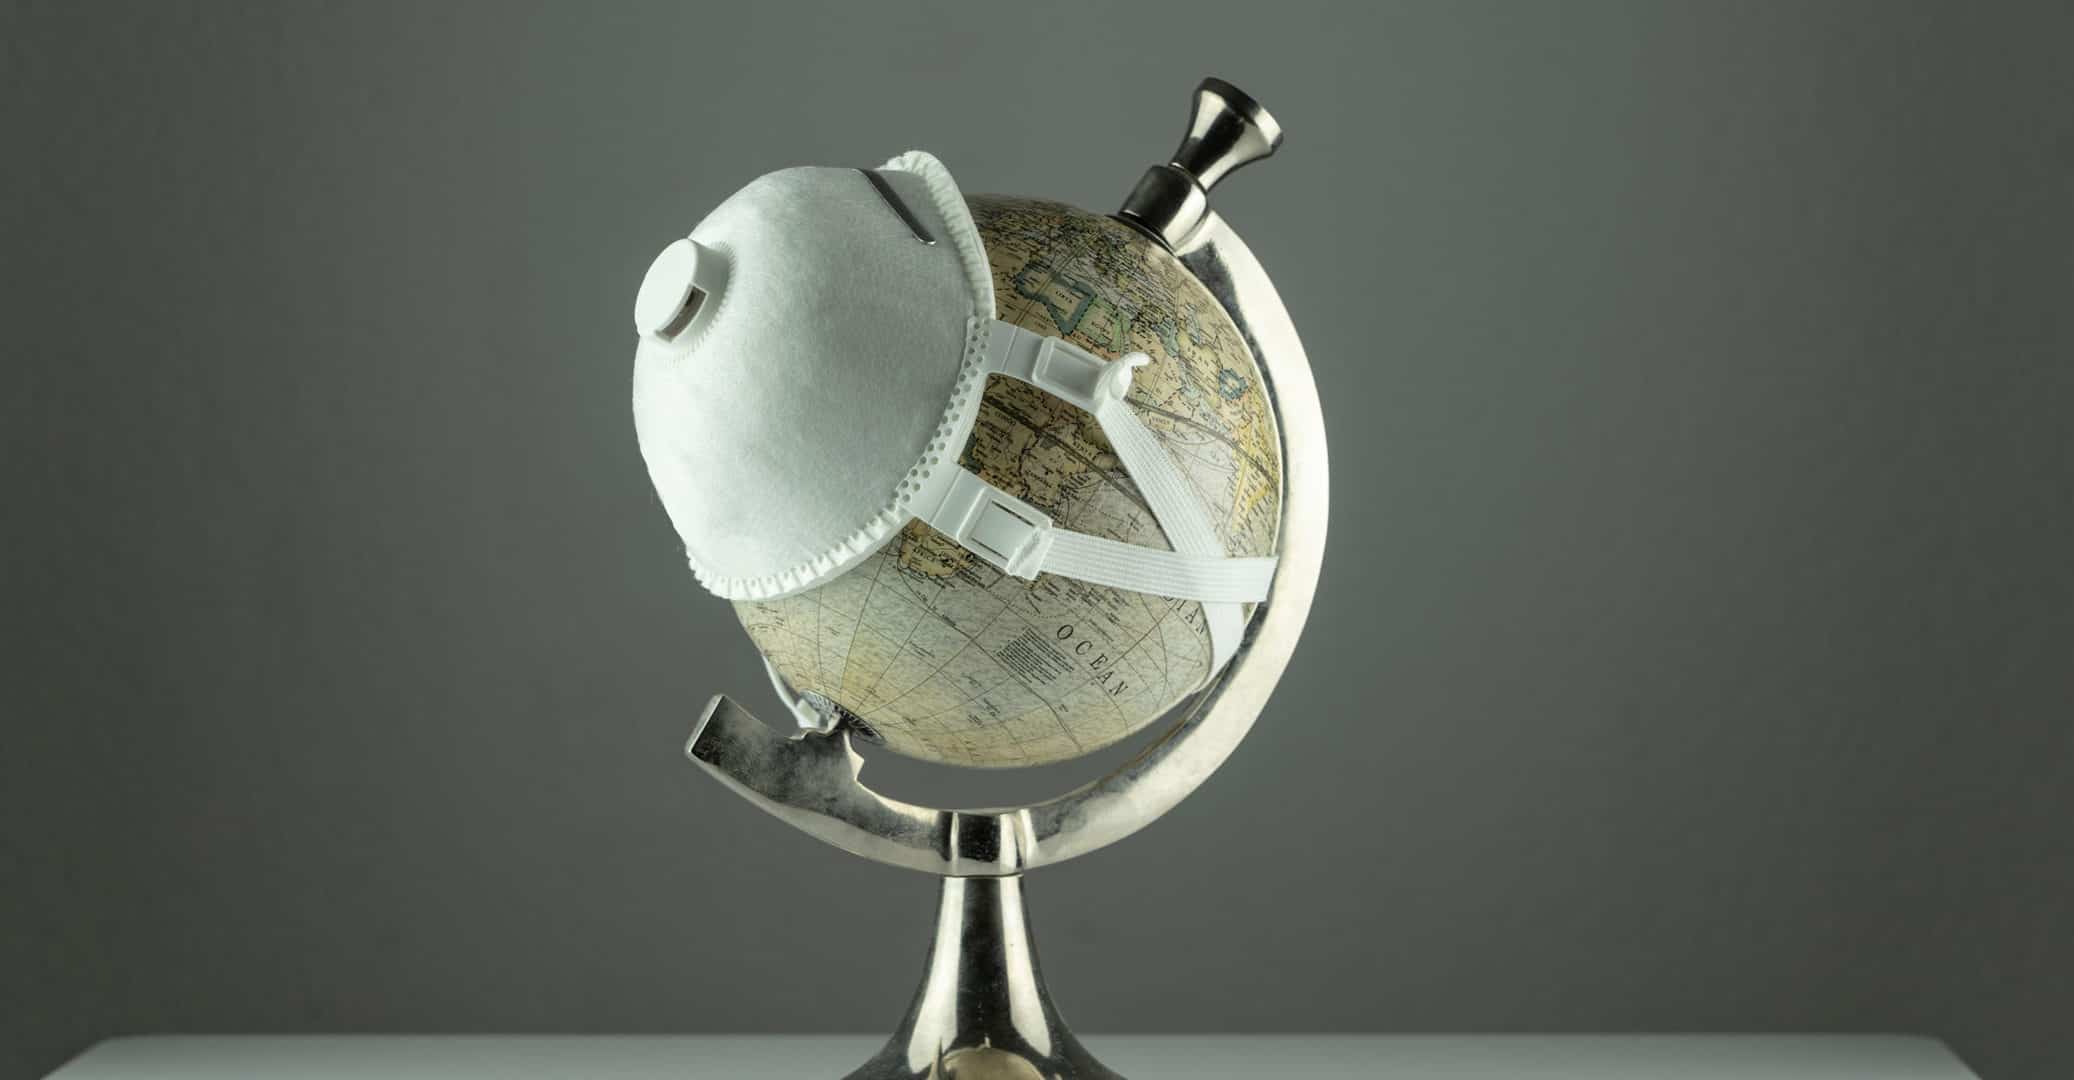 Reasons to Update Your Estate Plan Today - Globe with Mask Unexpected Occurences